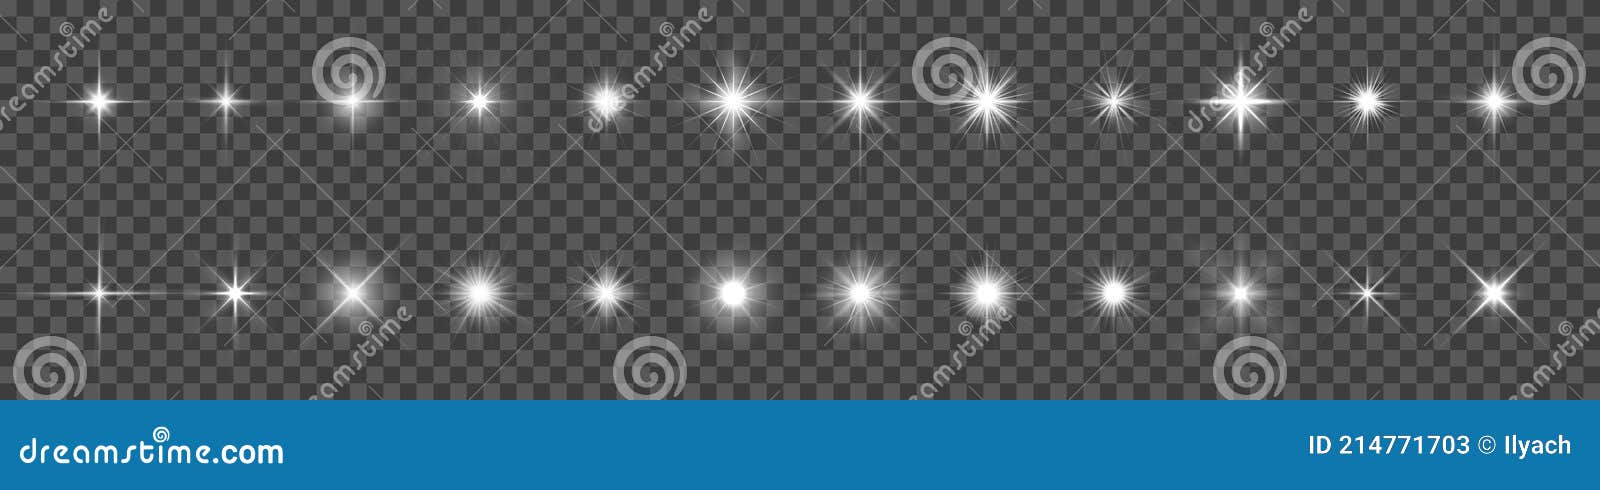 star light and shine glow,  sparks and bright sparkles effect on transparent background. stars flare and starlight flash